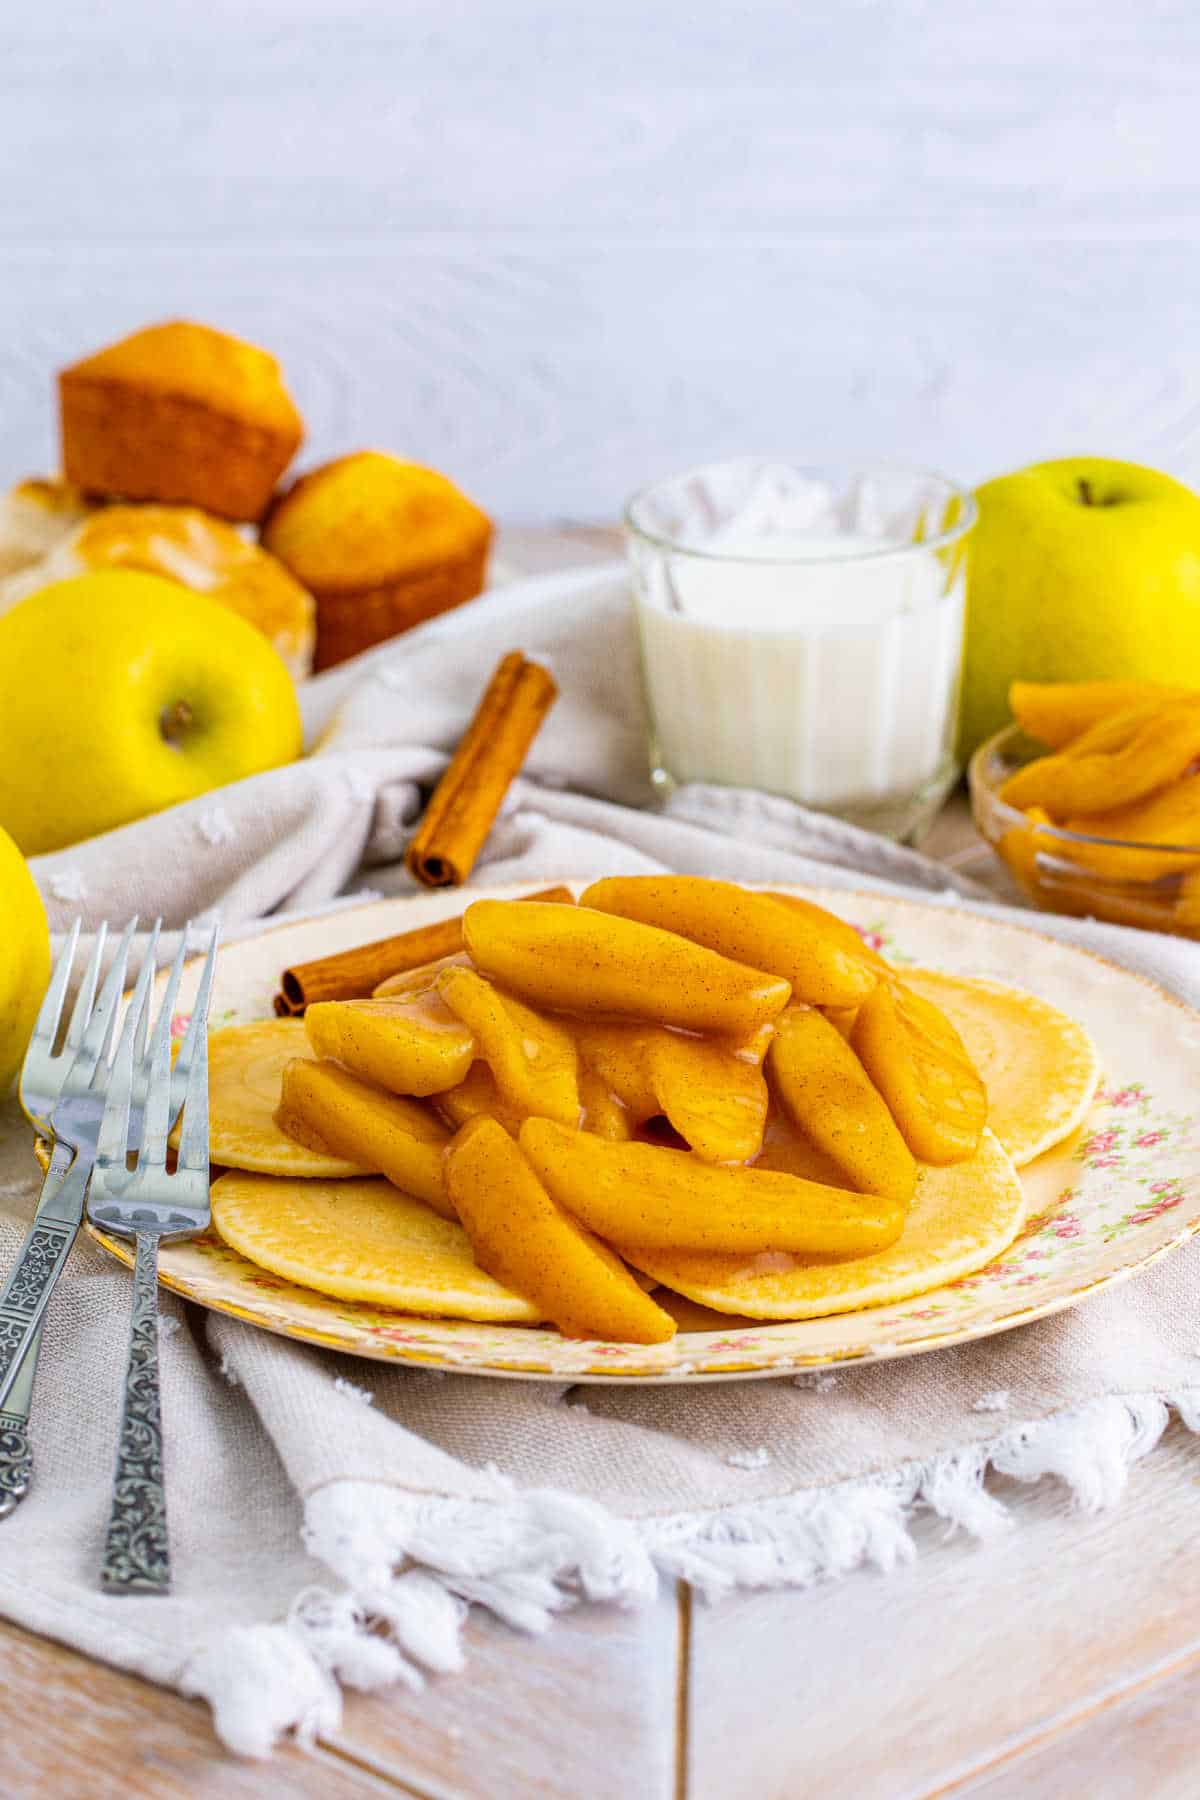 Fried apples on pancakes on a plate.